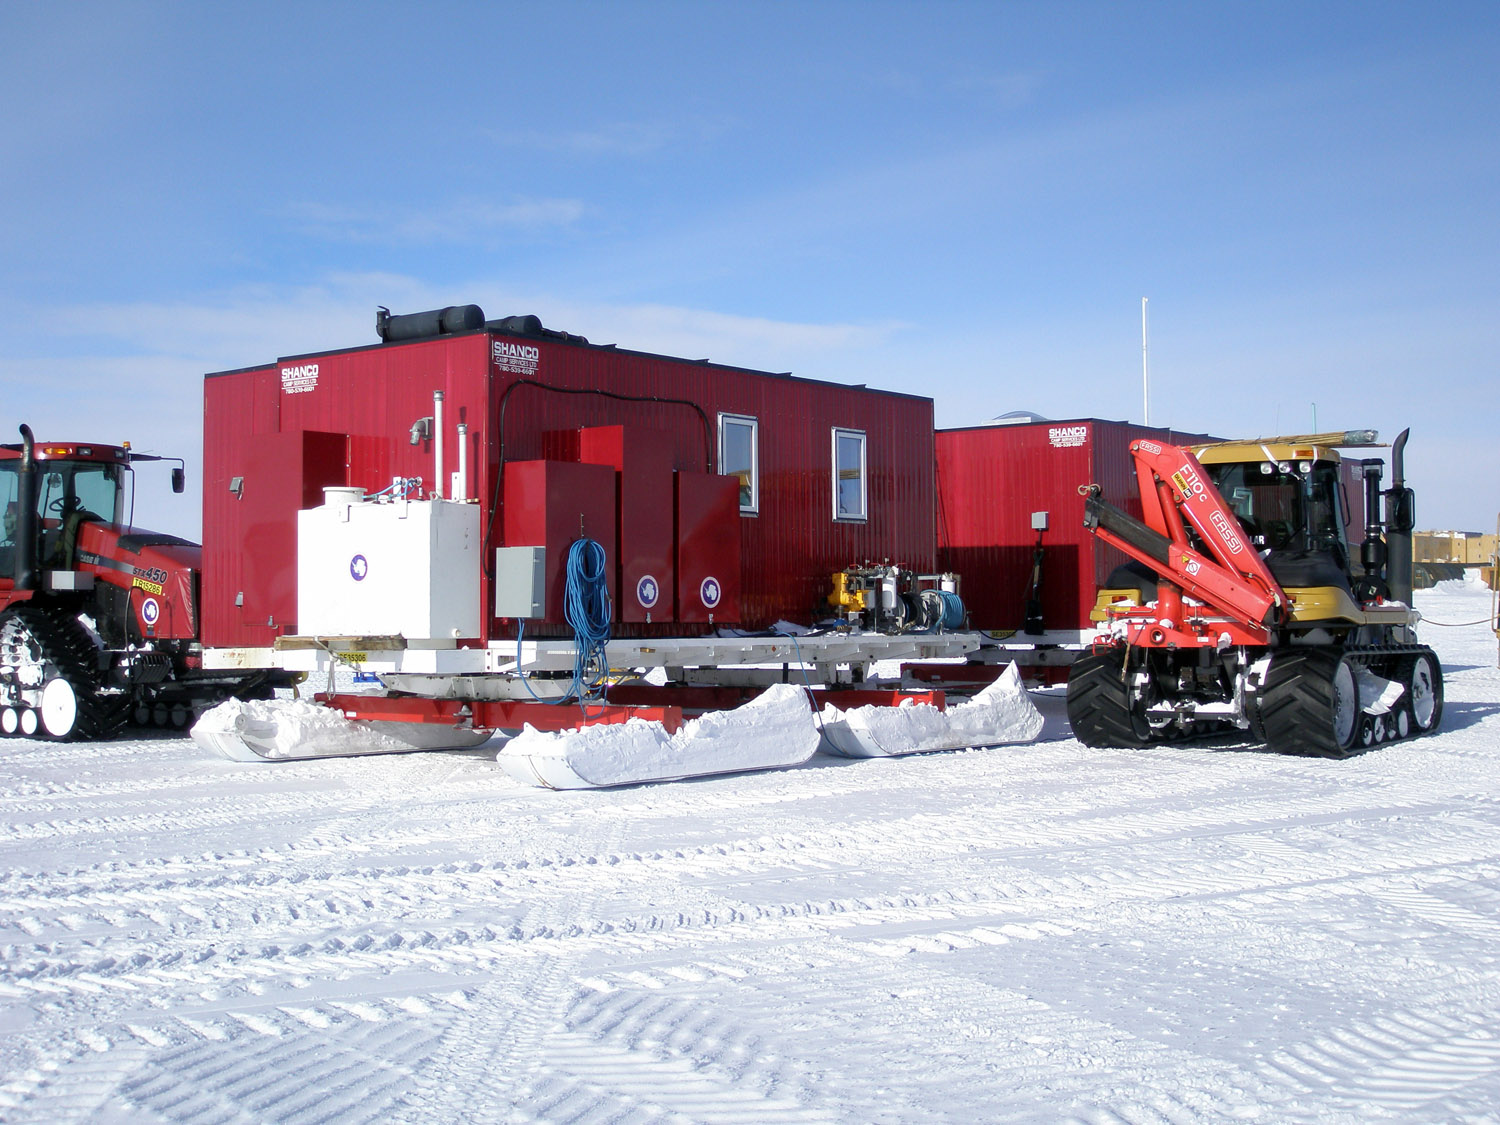 Vehicles and equipment of the South Pole Traverse - 07